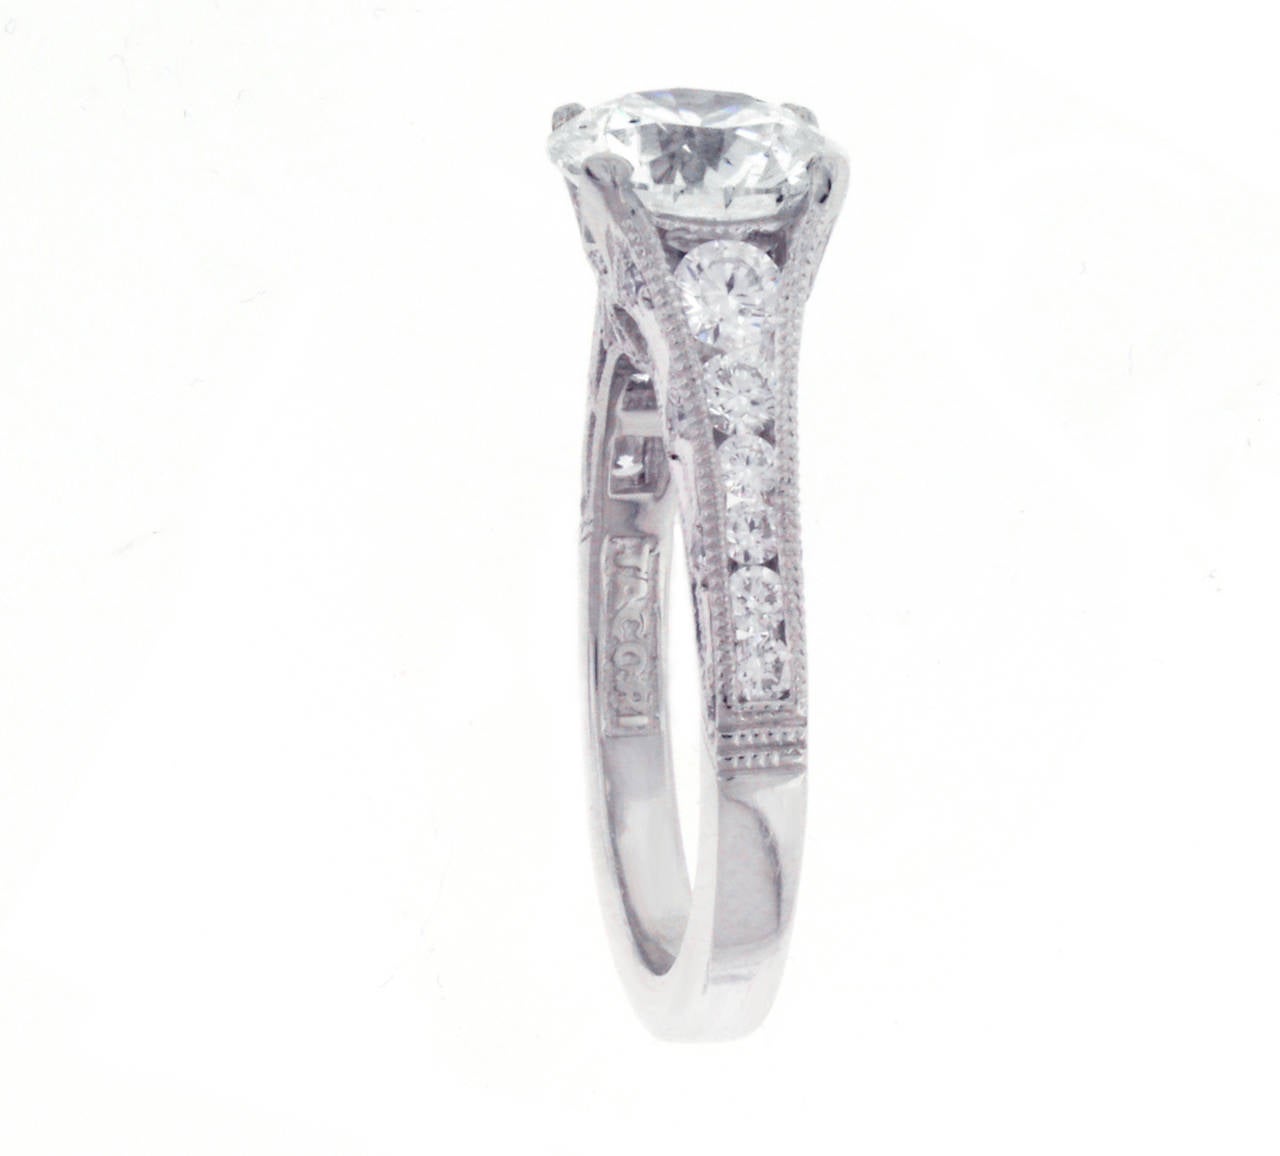 This Tacori diamond engagement ring features a 1.96 carat center round brilliant diamond. The diamond is I color, I1 clarity with excellent polish, symmetry and cut. The center diamond is accented by .60 carats of round diamonds going down the band